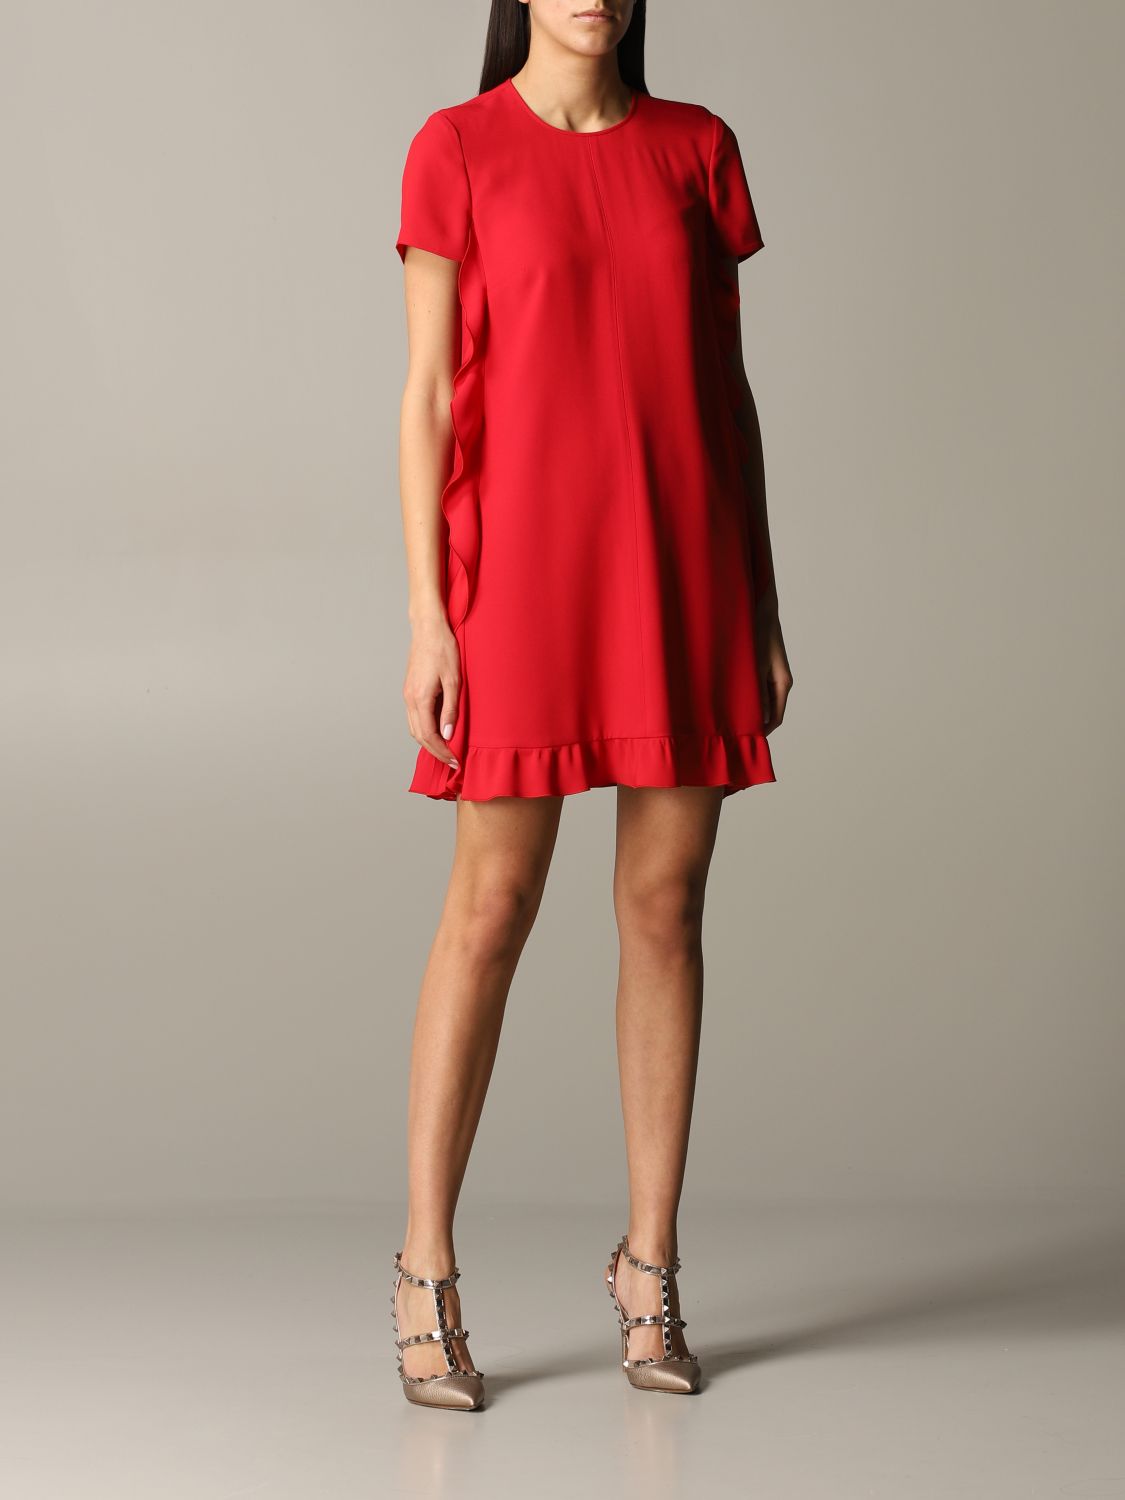 RED VALENTINO: silk dress with ruffles - Red | Valentino dress TR0VAQ65 0F1 online at GIGLIO.COM